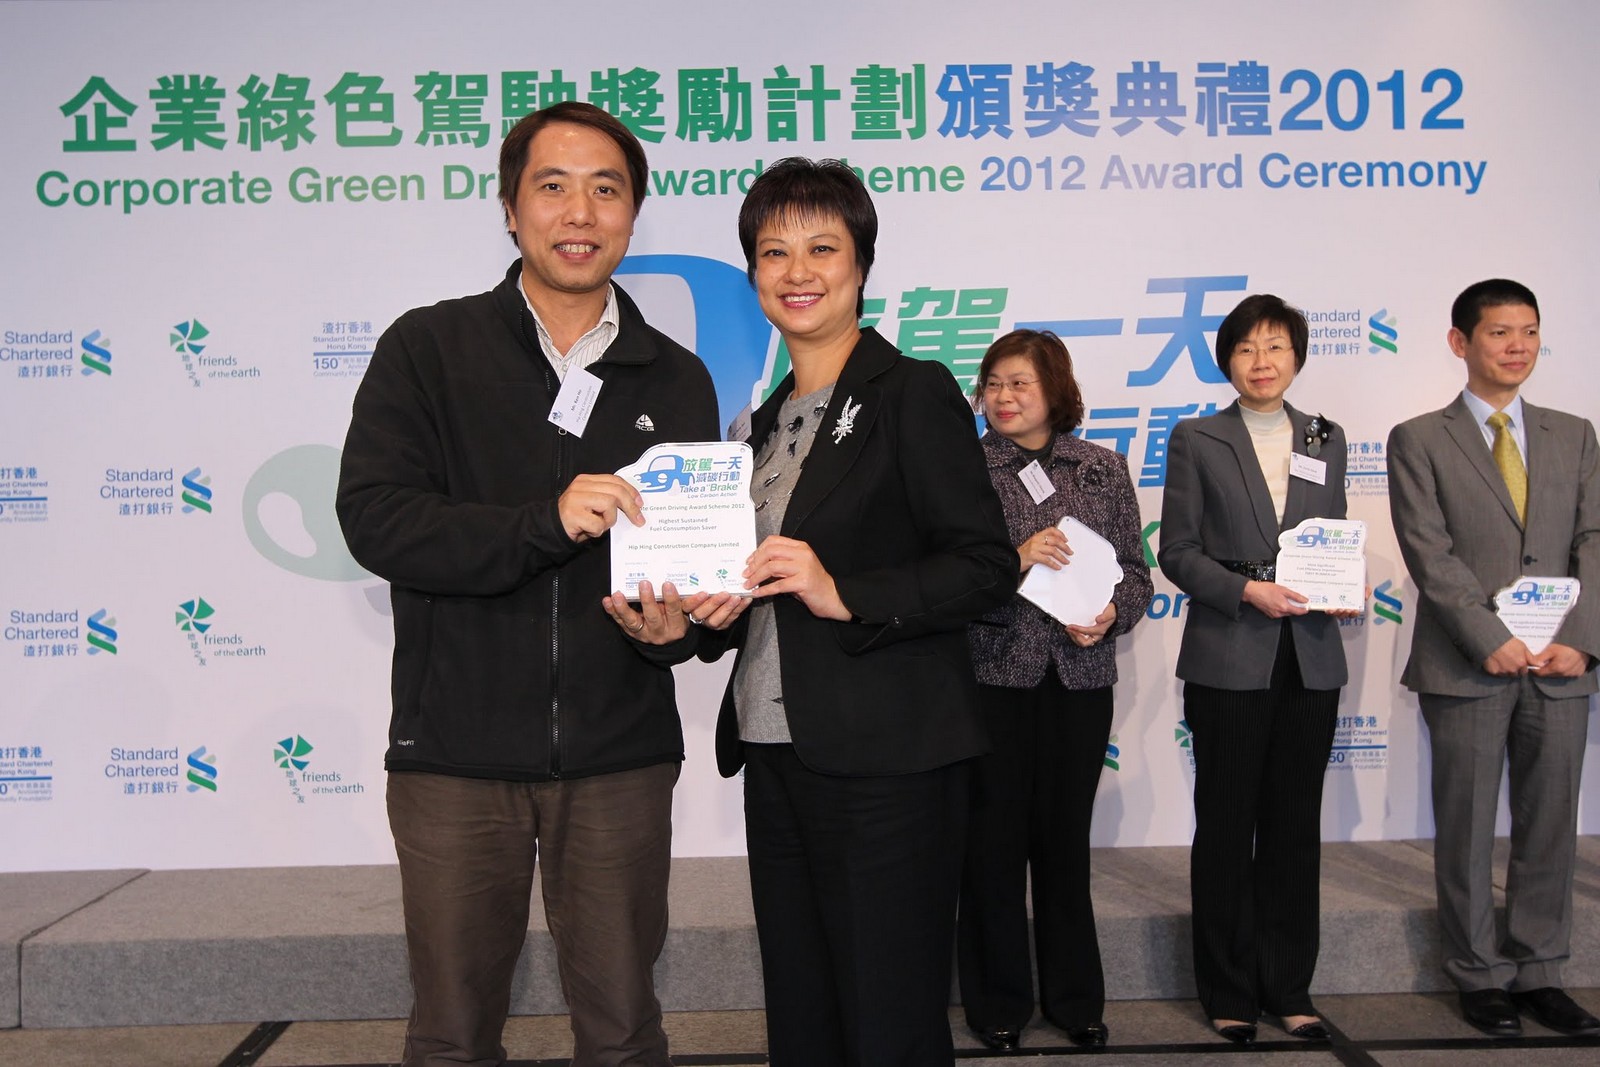 Mr. Ken Ho, Assistant Manager (Environmental), represents Hip Hing Construction to receive the “Highest Sustained Fuel Consumption Saver”